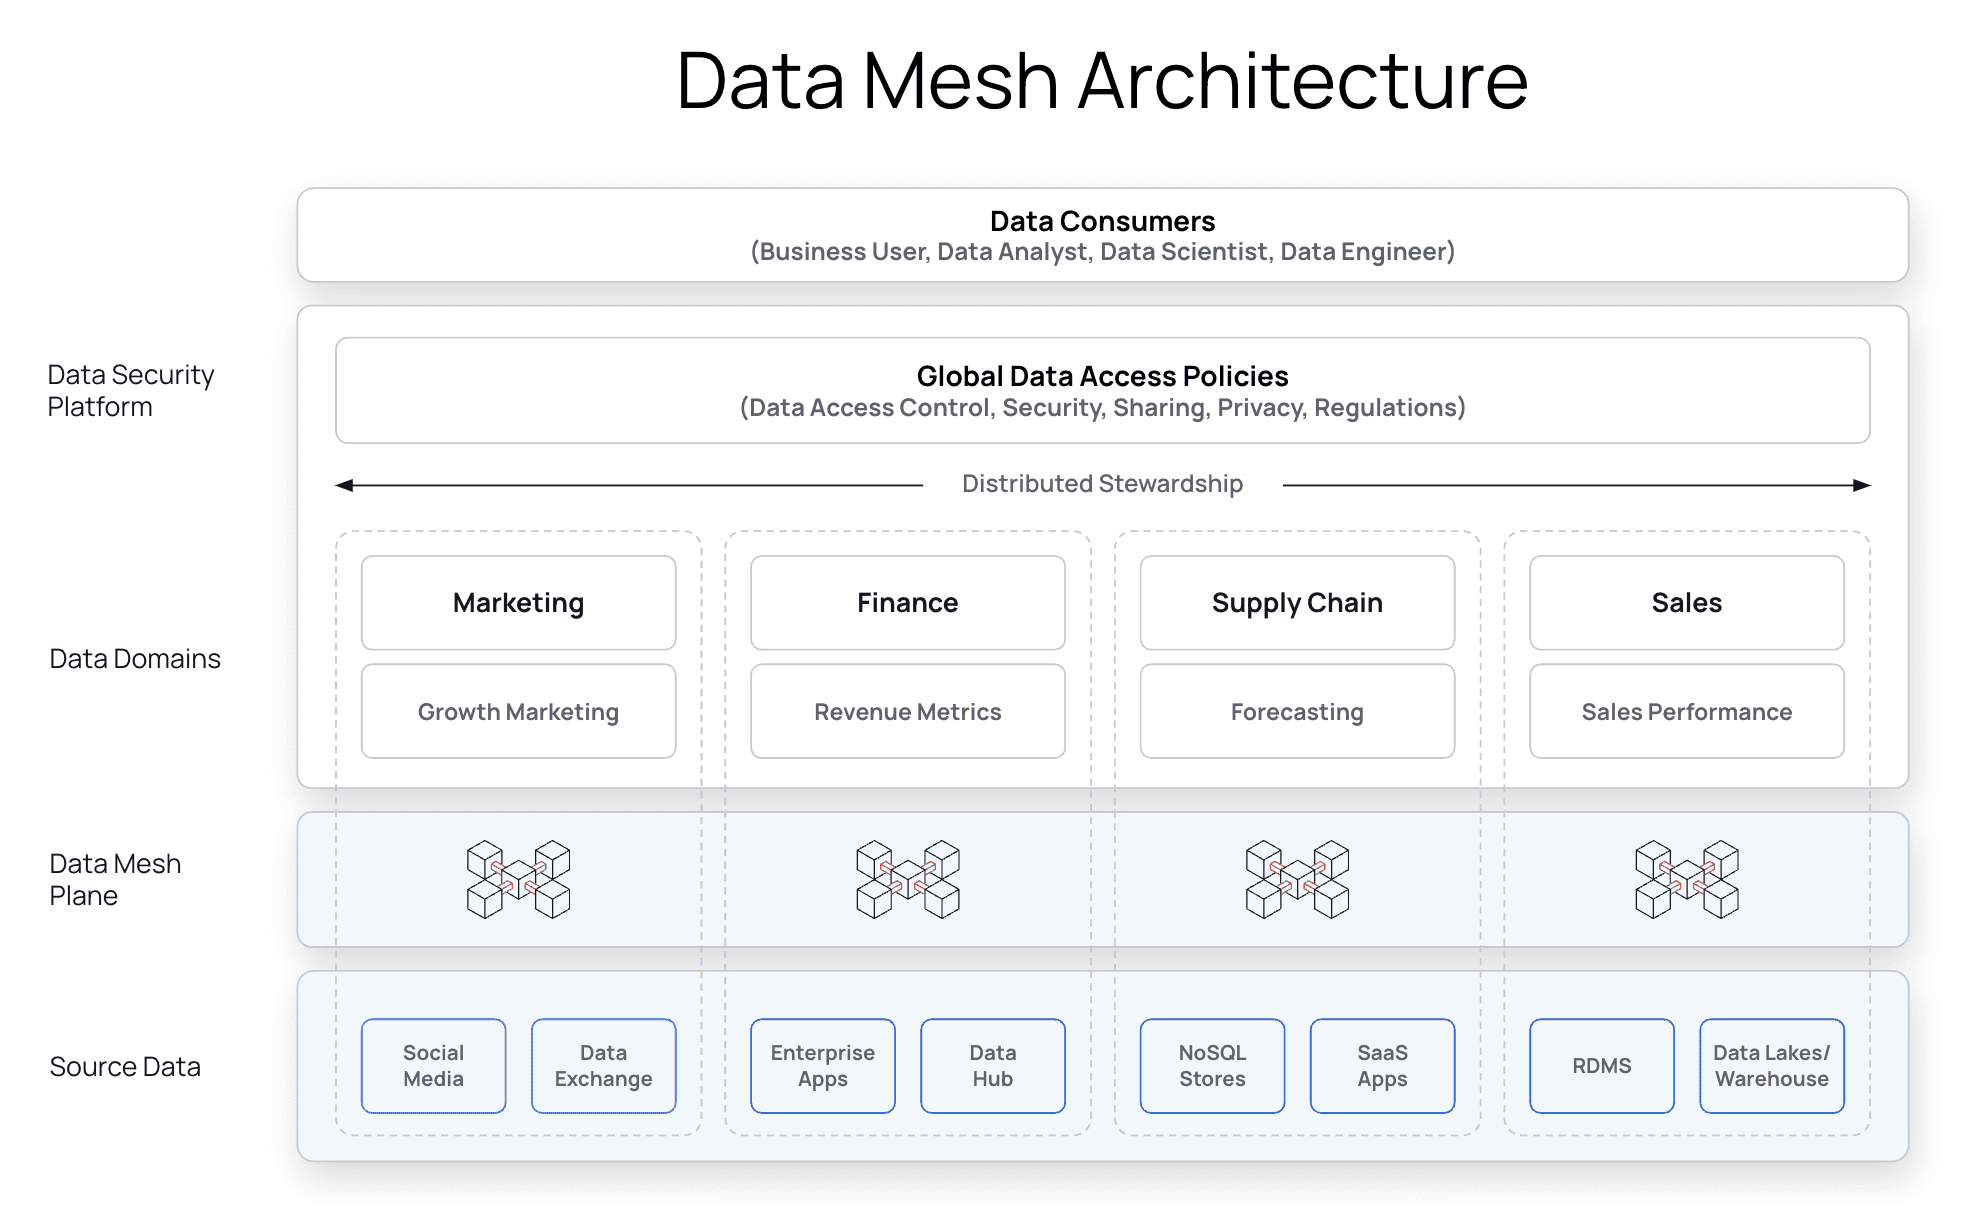 Distributed data stewardship implementation for data mesh architecture.